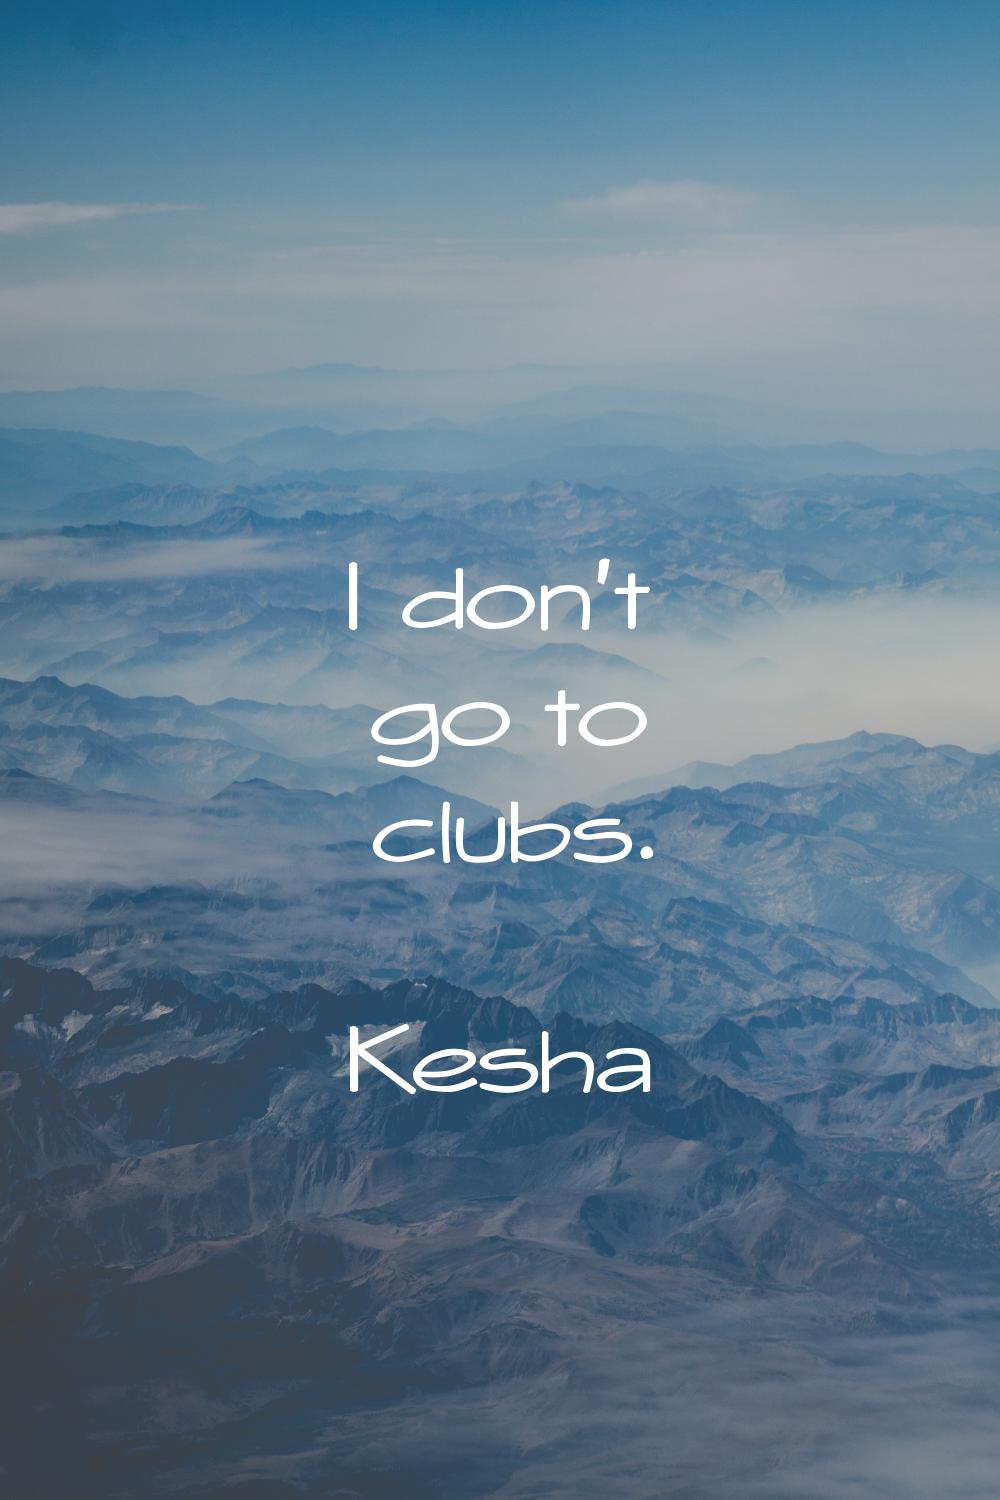 I don't go to clubs.